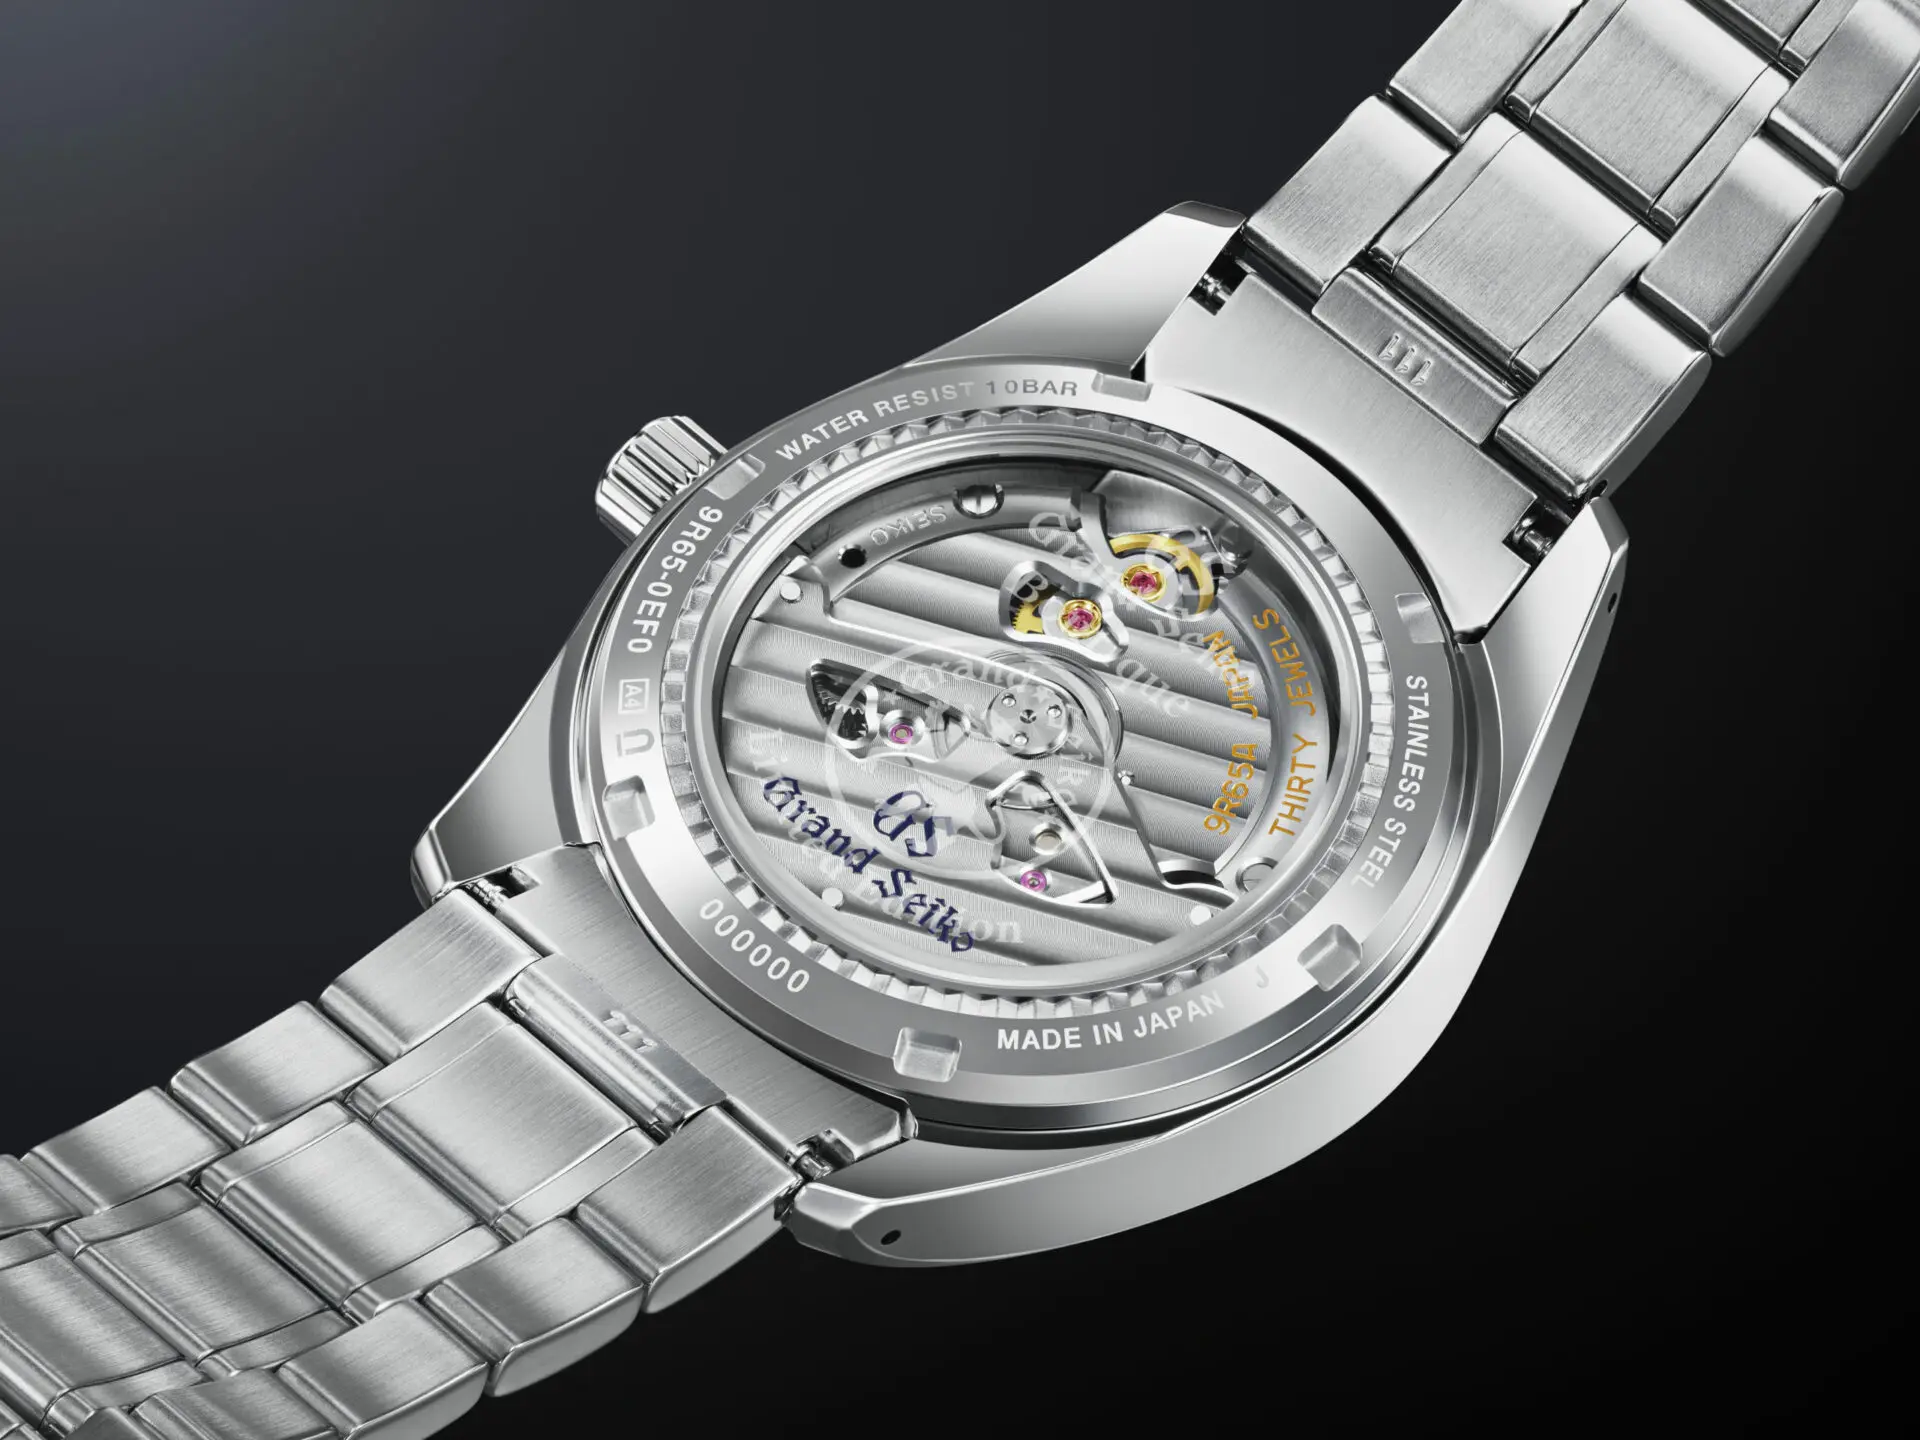 INTRODUCING: The Grand Seiko SBGA469 Boutique Online Exclusive